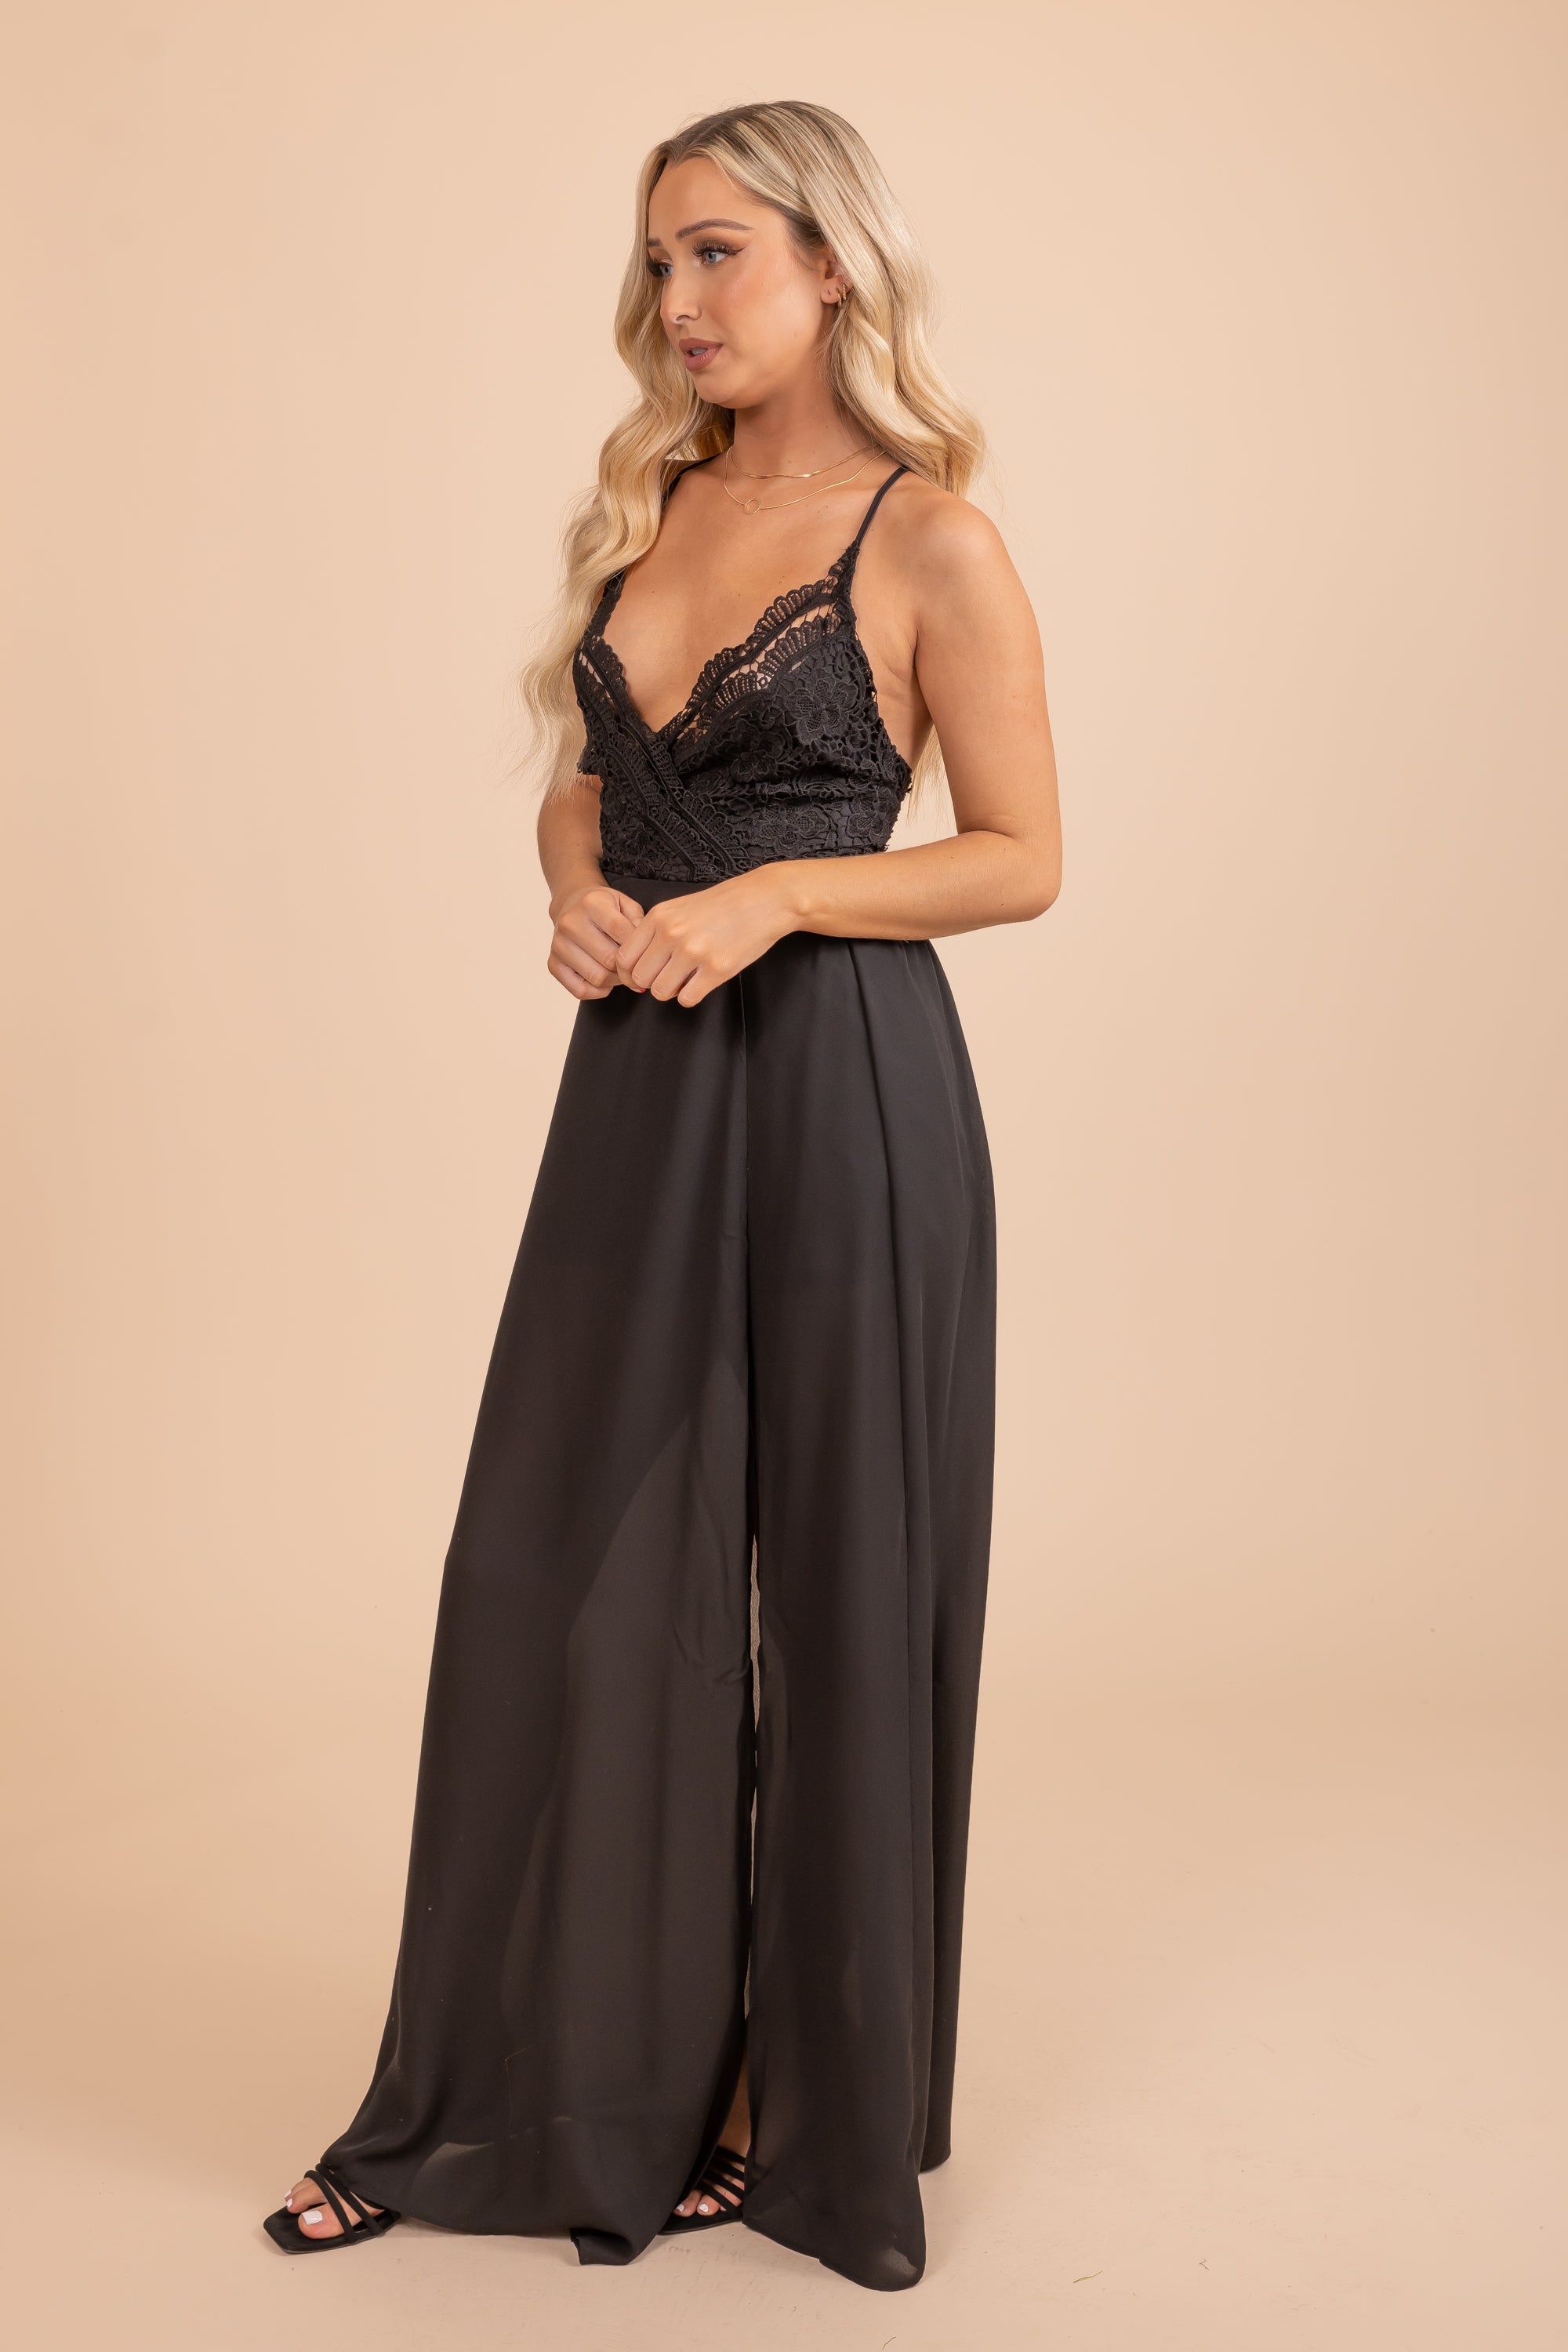 Black maxi dress with slit and lace on the top